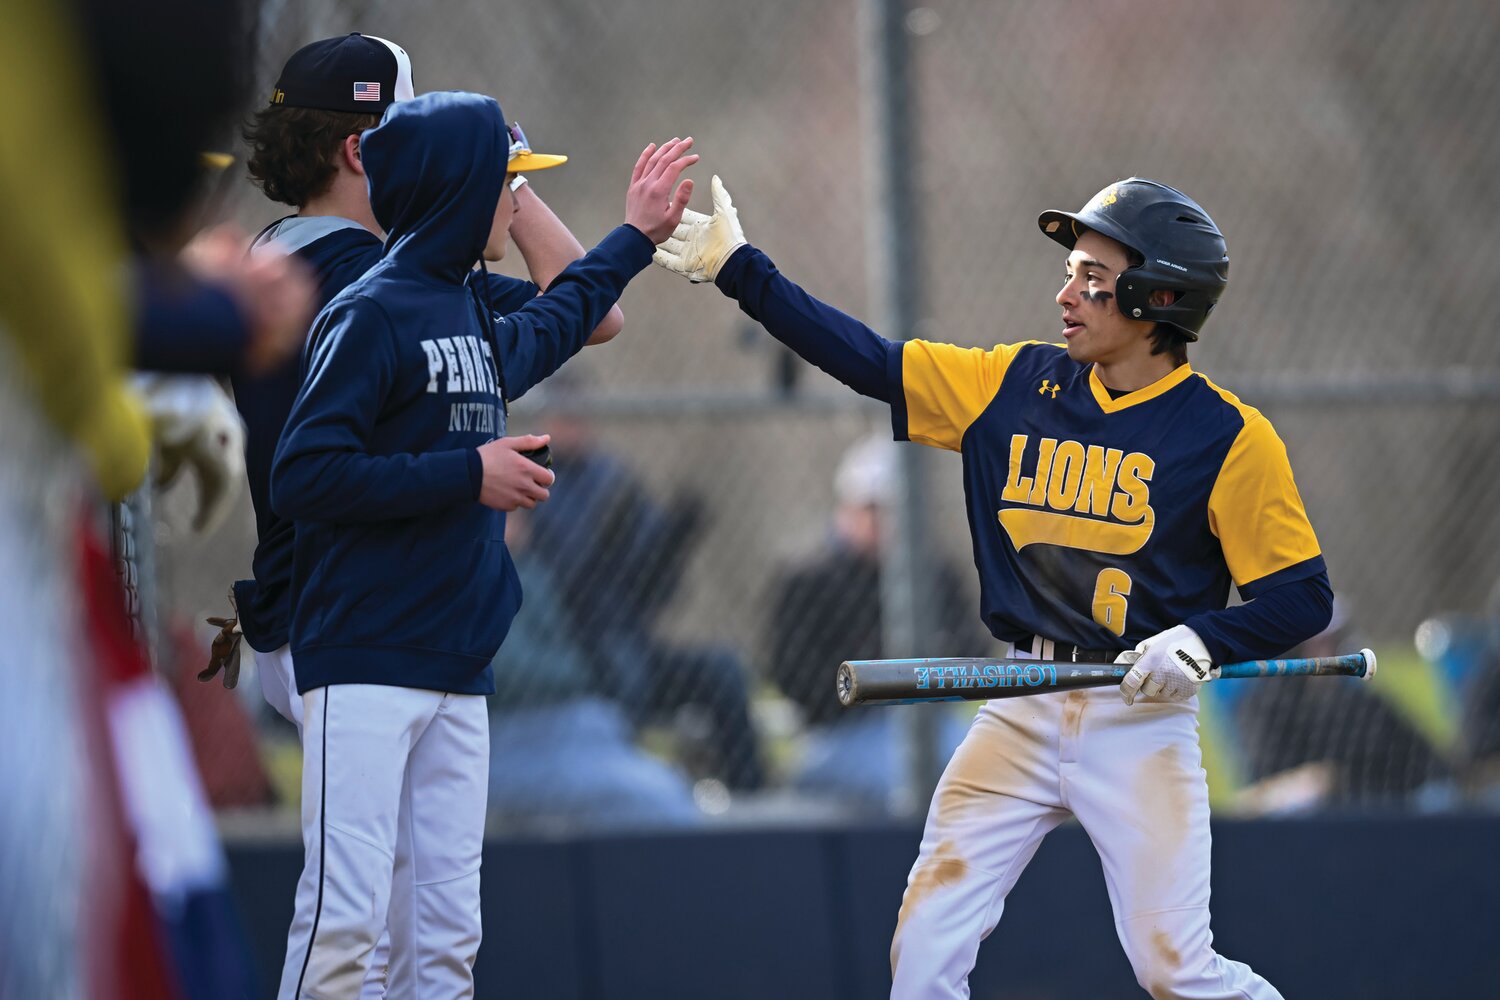 New Hope-Solebury’s Kieran Patel gets greeted by the team after scoring the game’s first run in the first inning.